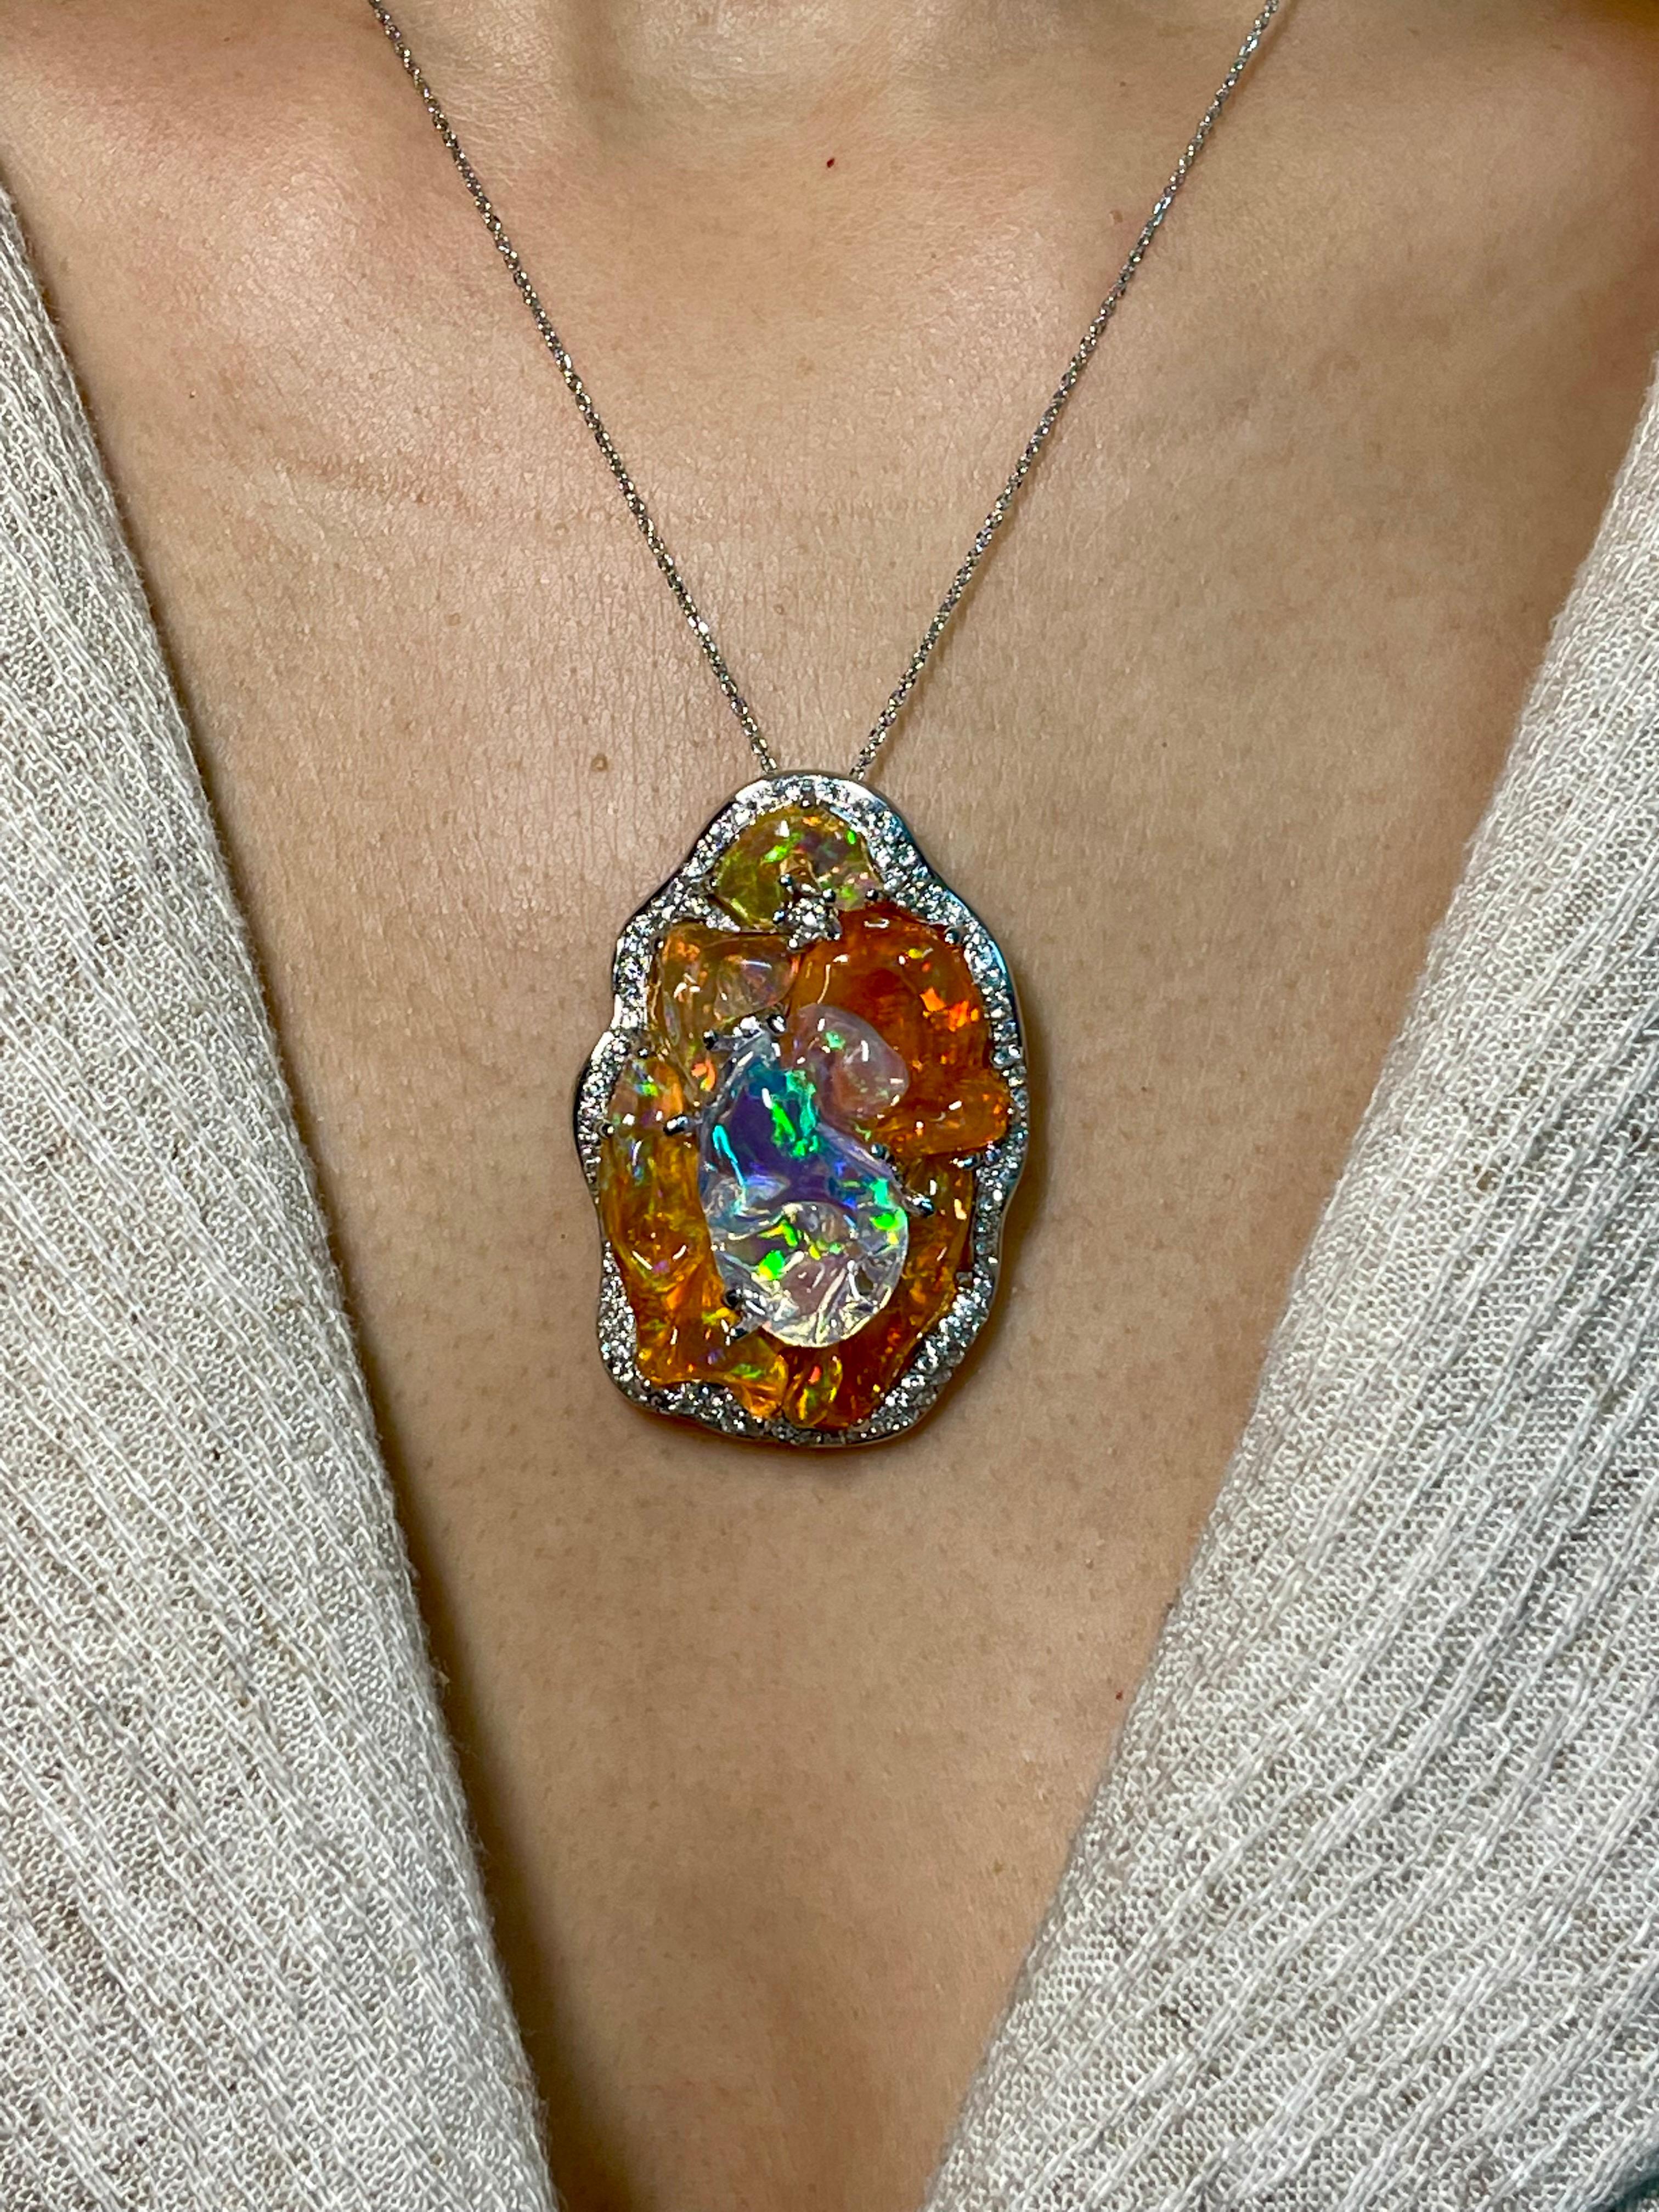 Please check out the HD video! This is an important and substantial piece! 6 pieces of top gem quality opals make up this large pendant. Here is a natural Mexican fire opal and diamond pendant with superb play of color. The natural opals in this